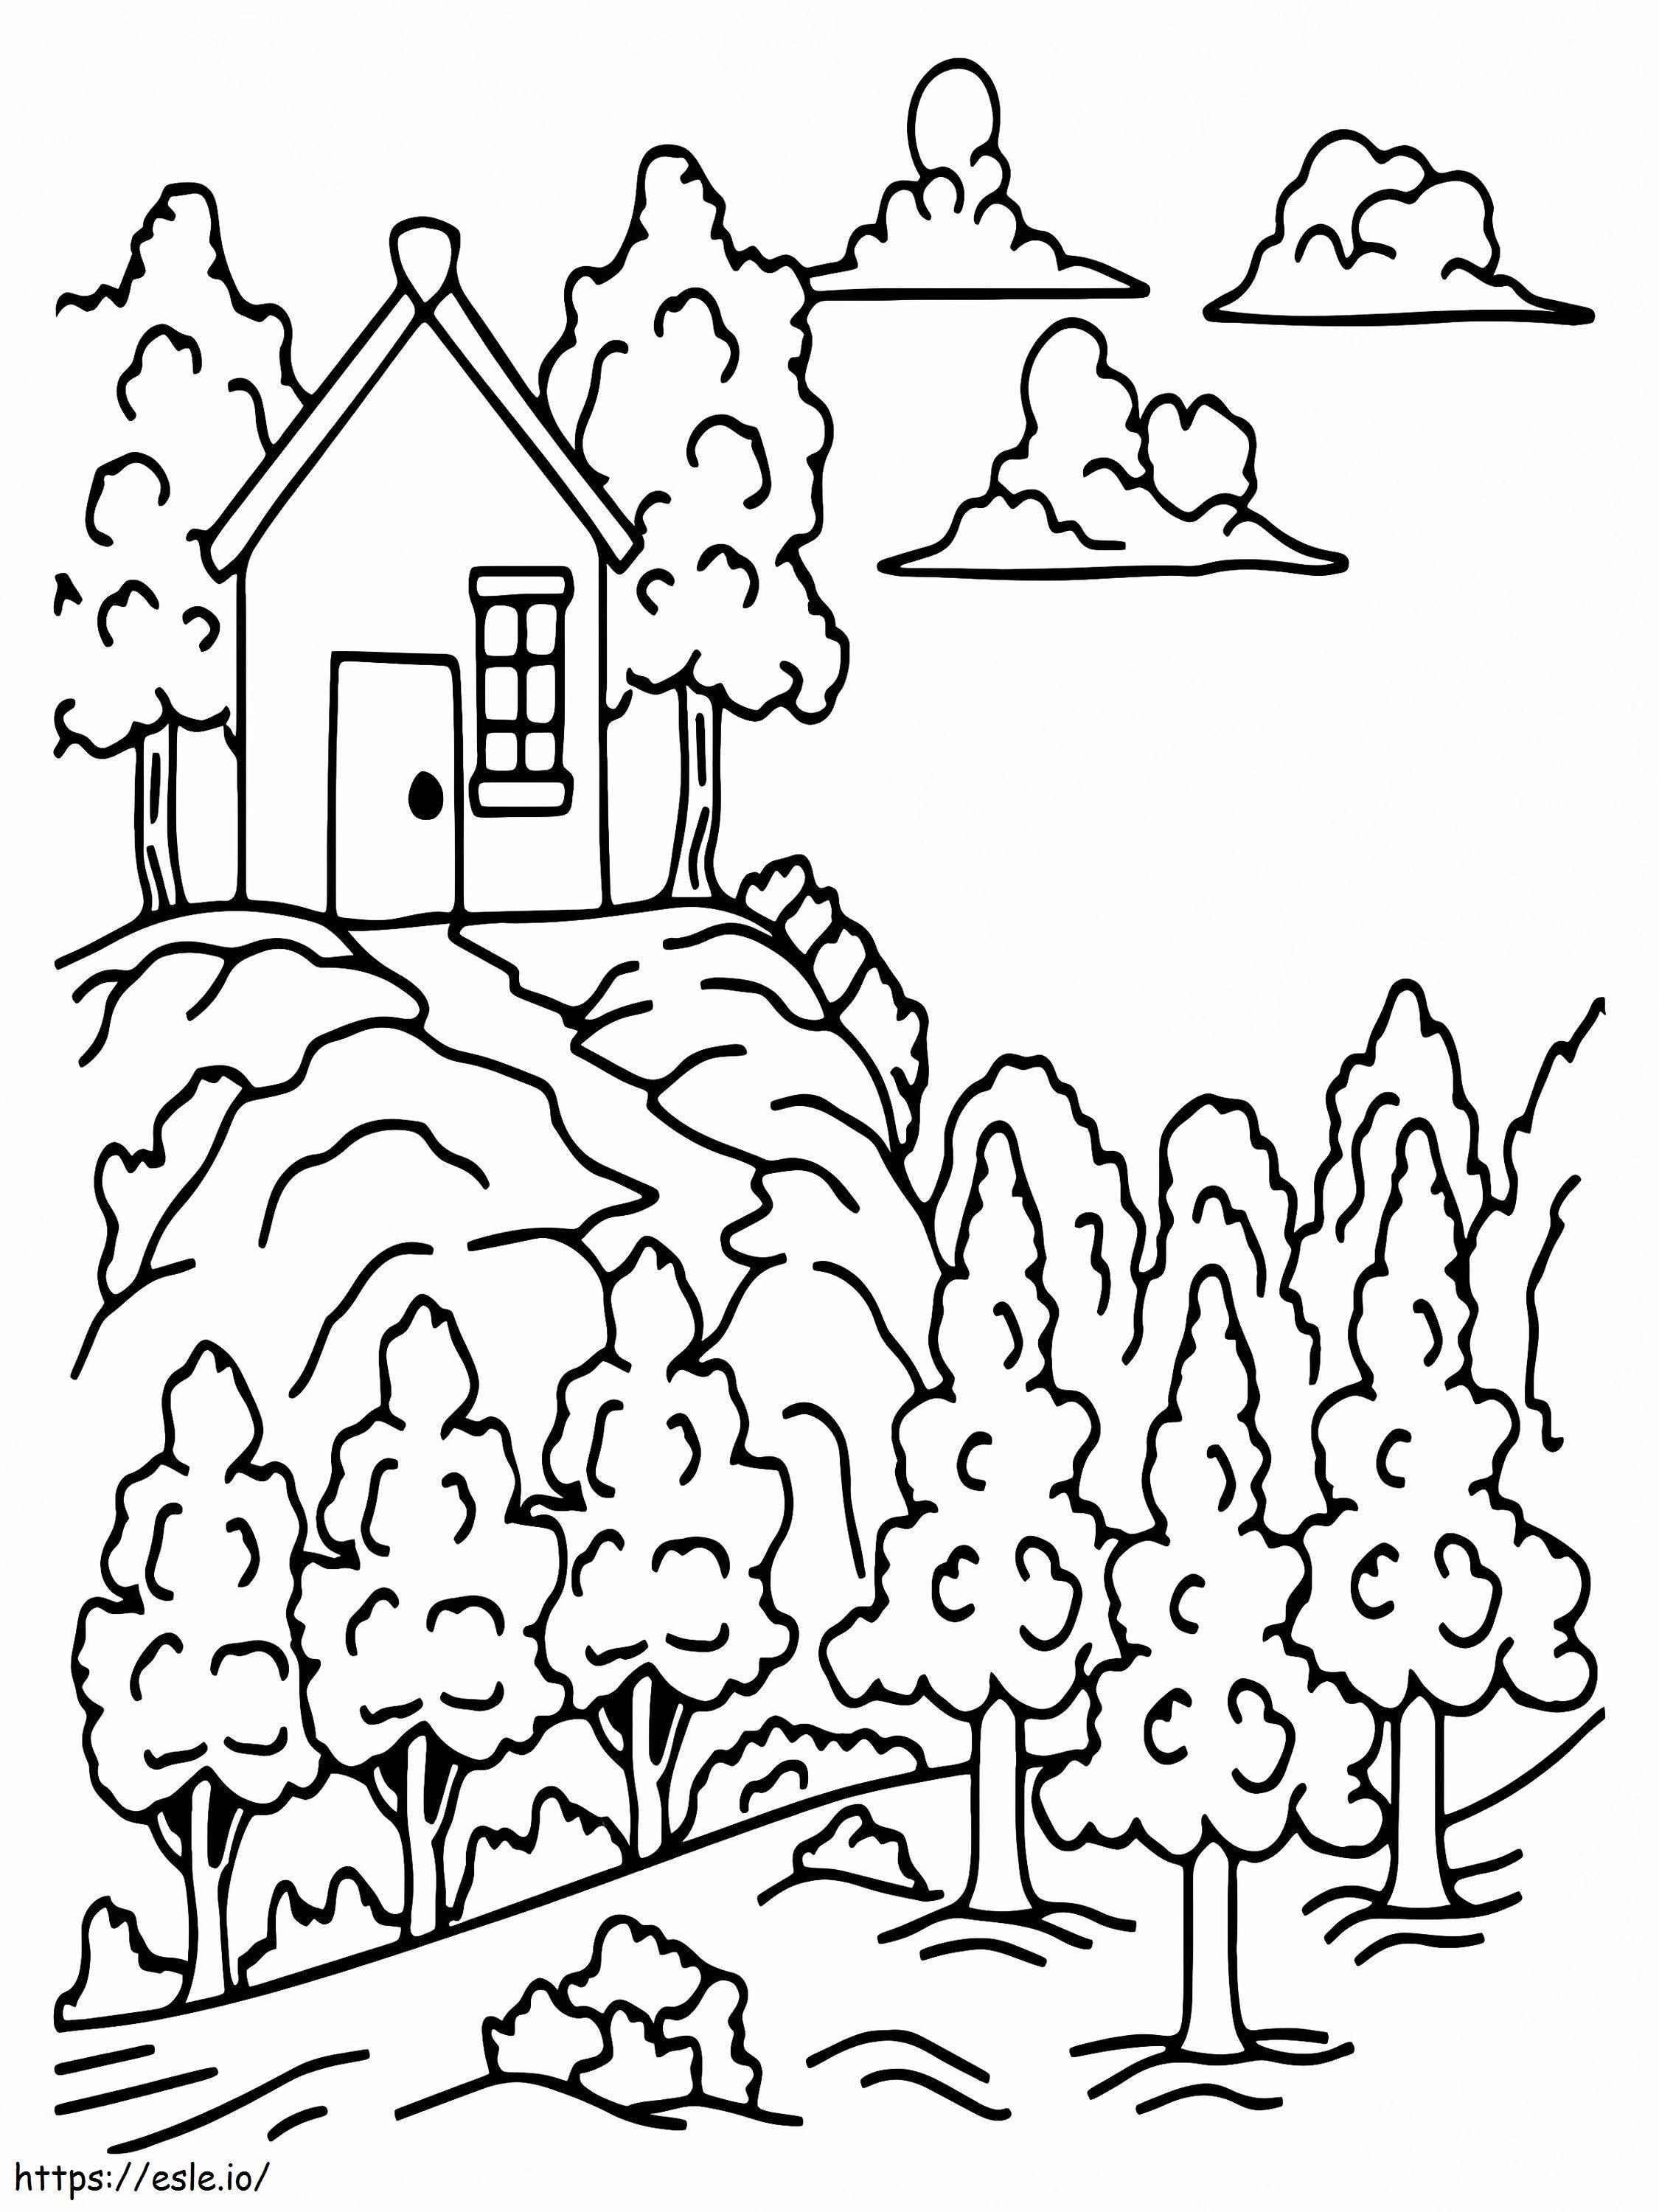 Forest Hill House coloring page